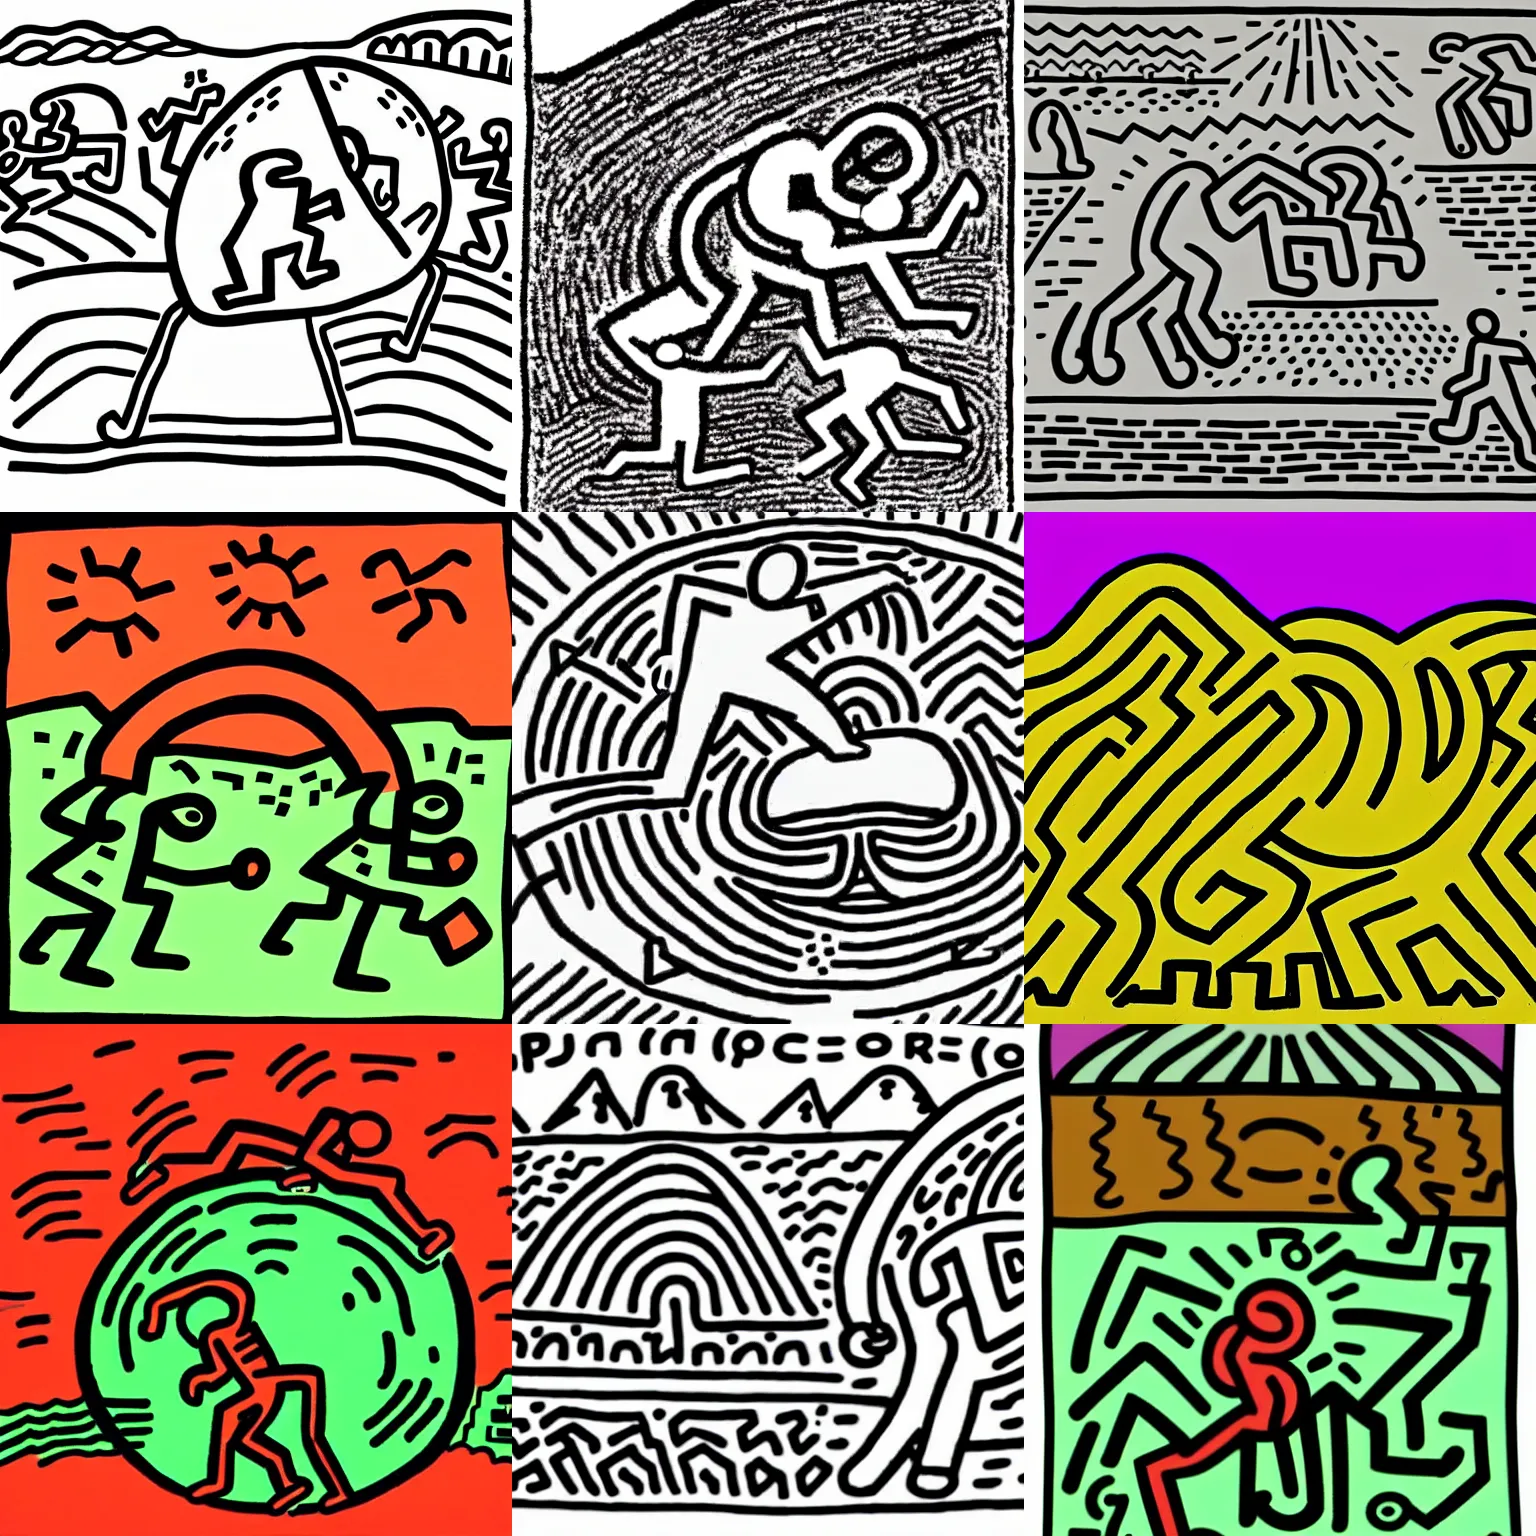 Prompt: Keith Haring illustration of Sisyphus pushing boulder up a hill